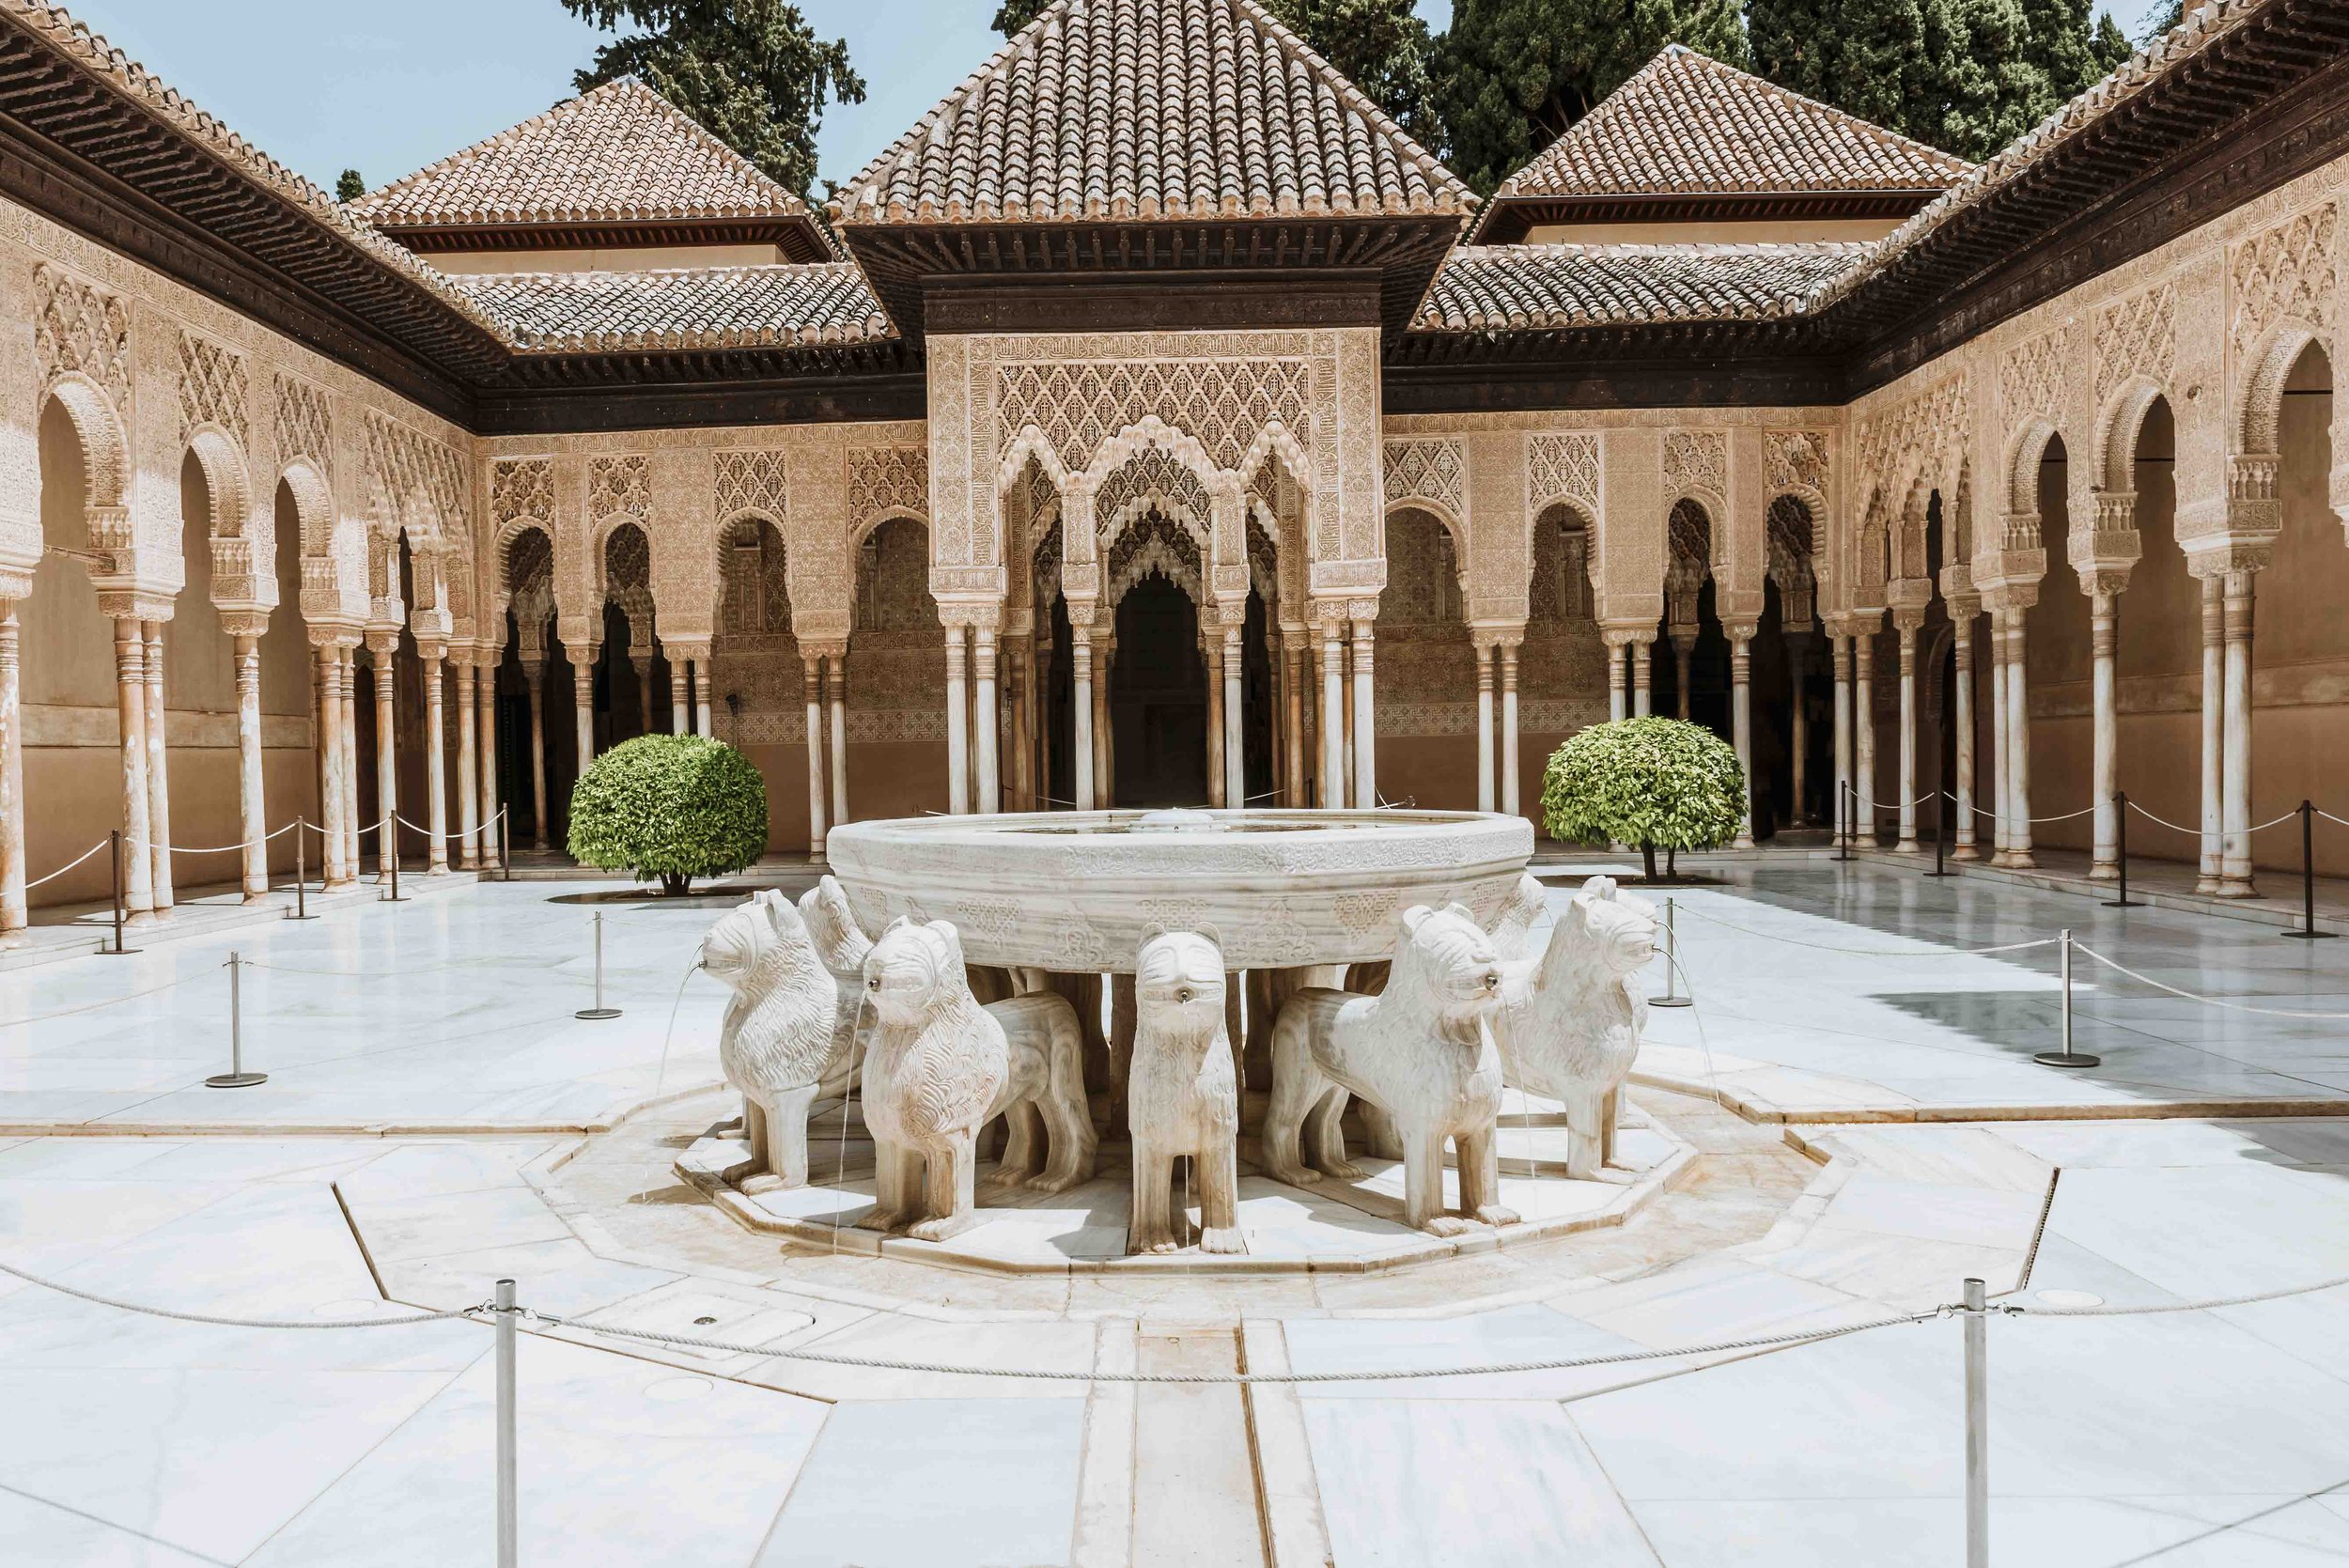 Lions supporting a water basin inside the Alhambra night